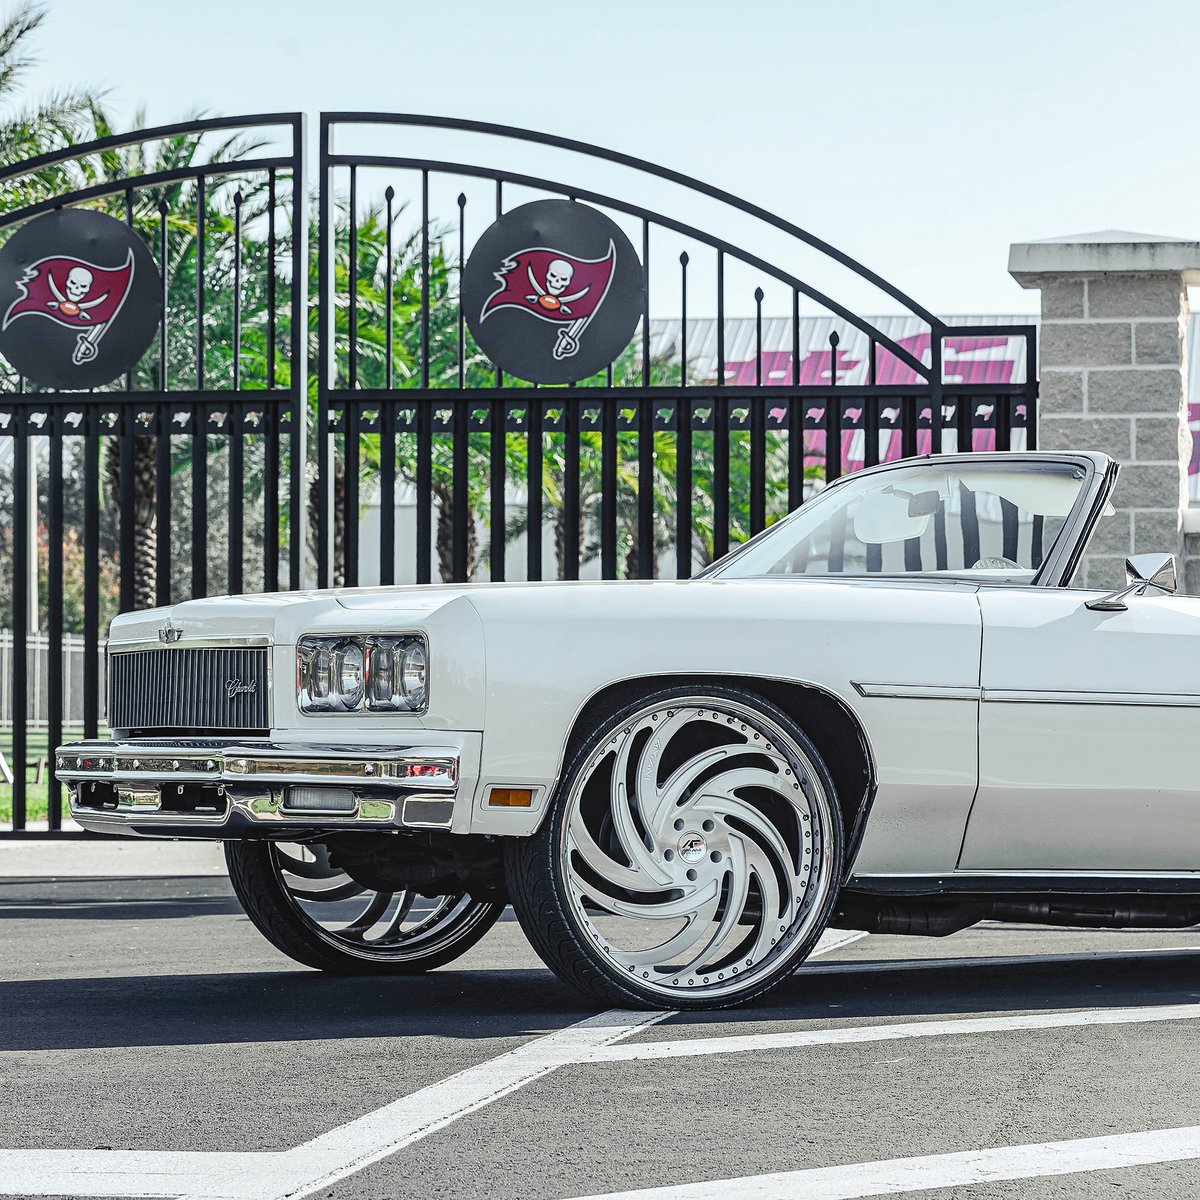 1975 Chevy Caprice on Amani Forged Parlo wheels
.
.
.
.
#amaniforged #teamamani #teamamaniforged #amaniforgedwheels #wheels #wheelsforsale #bigwheels #custom #customwheels #customfinish #customfinishes #wheelgang #amaniforgedtakeover #Chevrolet #Caprice